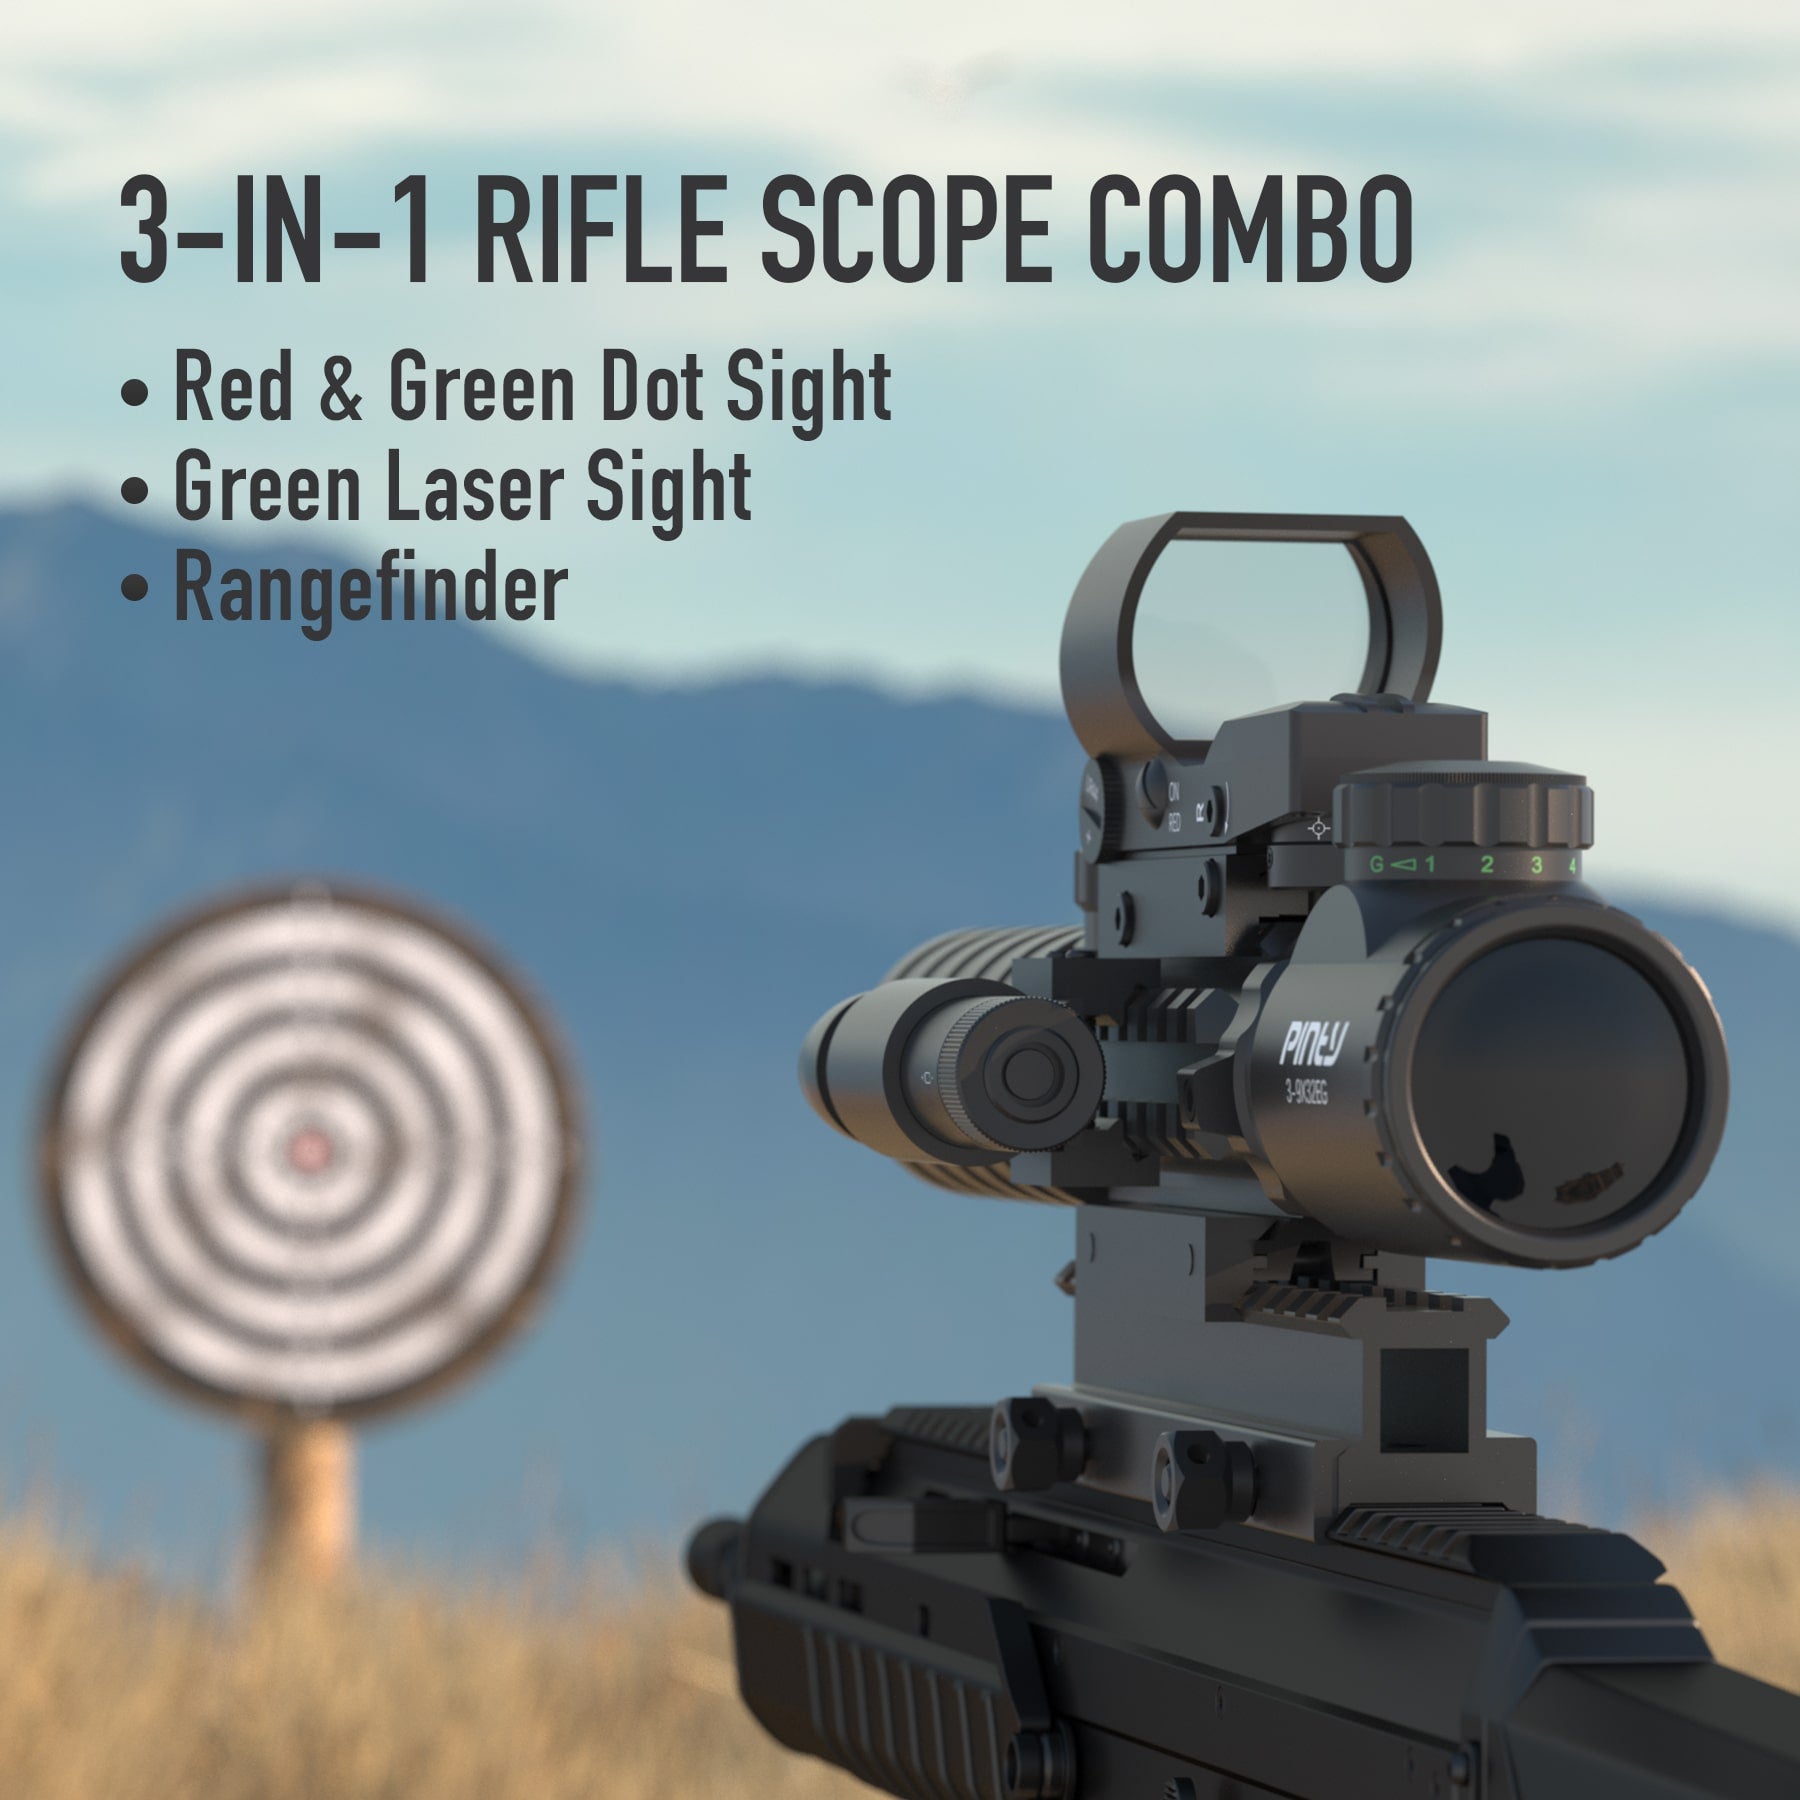       Pinty-Rifle-Scope-3-9x32-Rangefinder-Illuminated-Reflex-Sight-4-Reticle-Red-Dot-Laser-Sight-with-14-Slots-1-inch-High-Riser-Mount-sig-scopes-tactical-scope